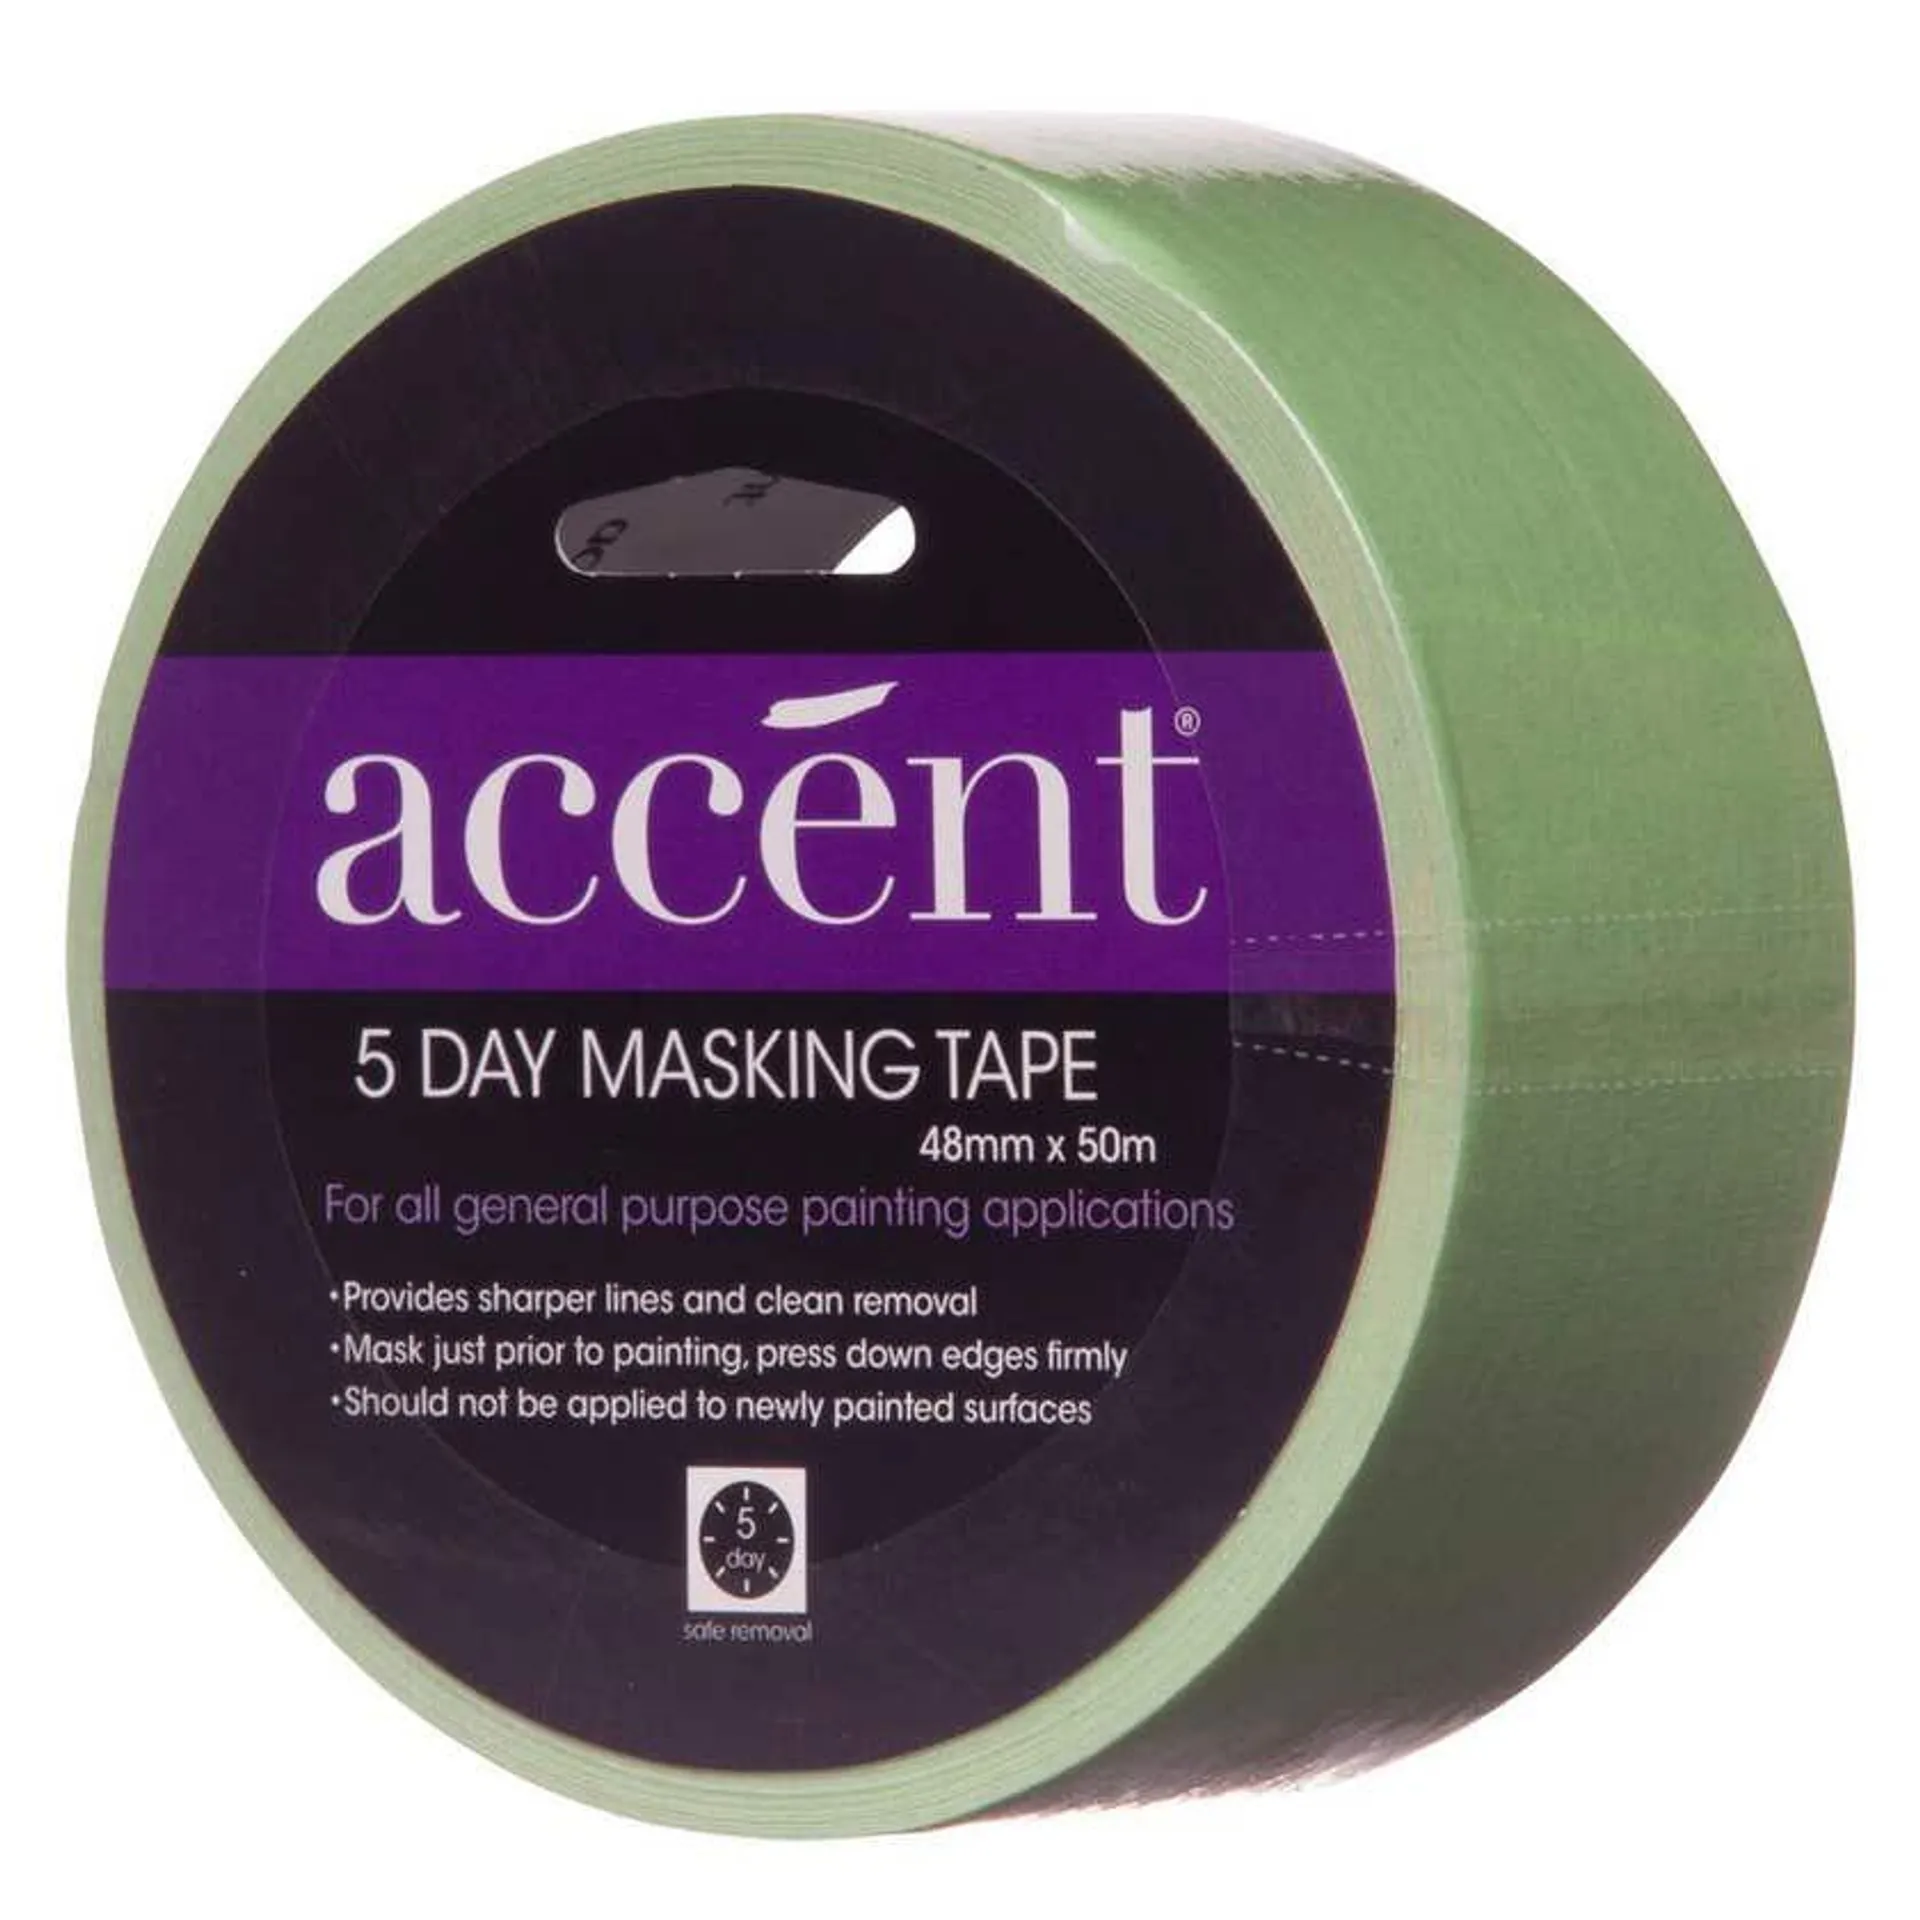 Accent 5 Day Masking Tape 48mm x 50m